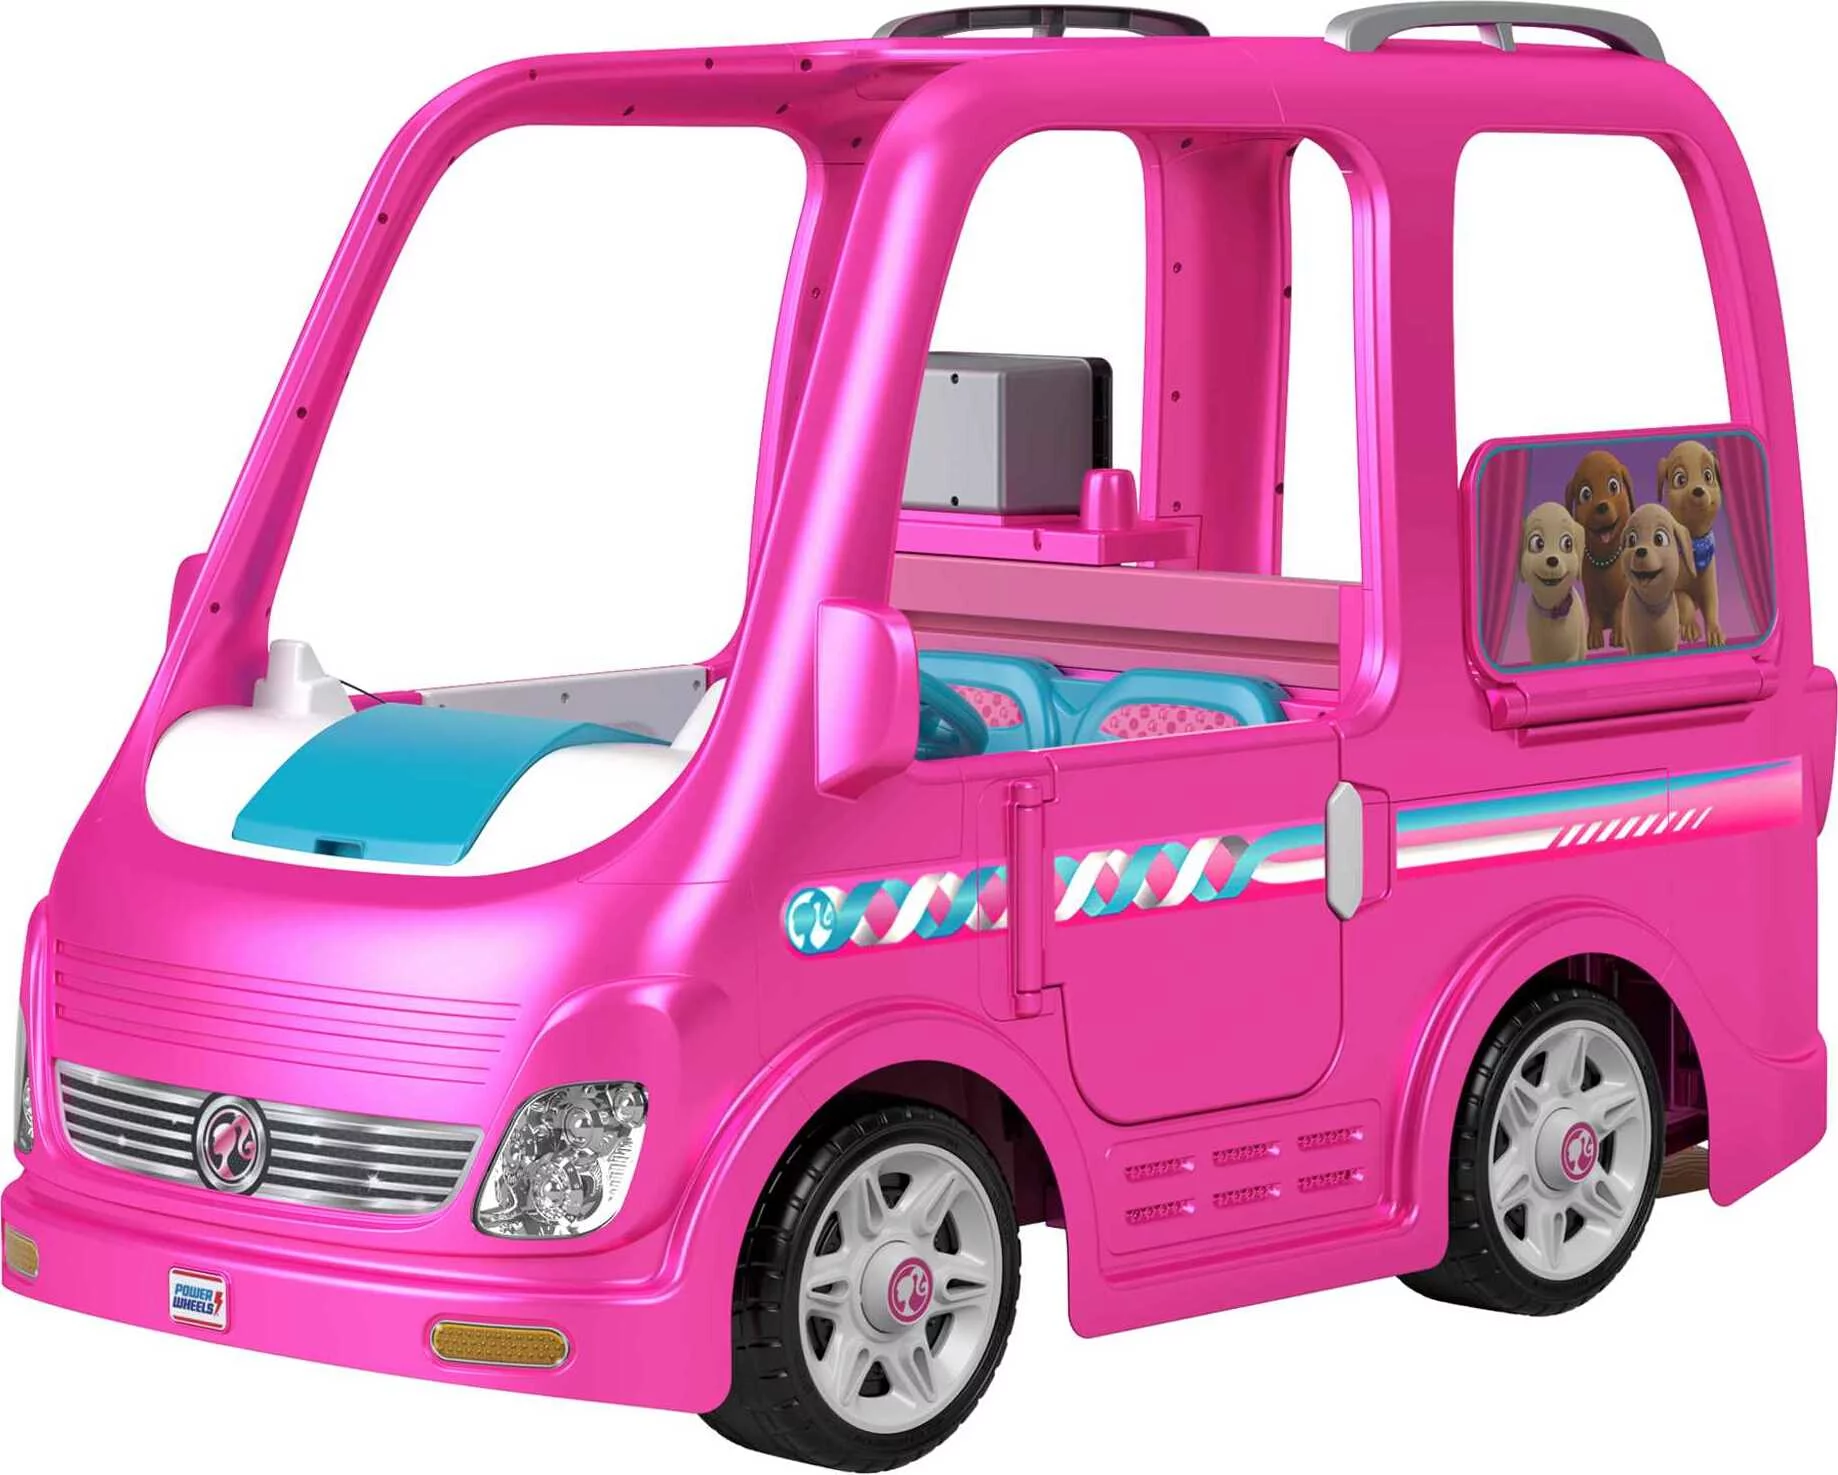 12V Power Wheels Barbie Dream Camper Battery-Powered Ride-On with Music Sounds & 14 Accessories